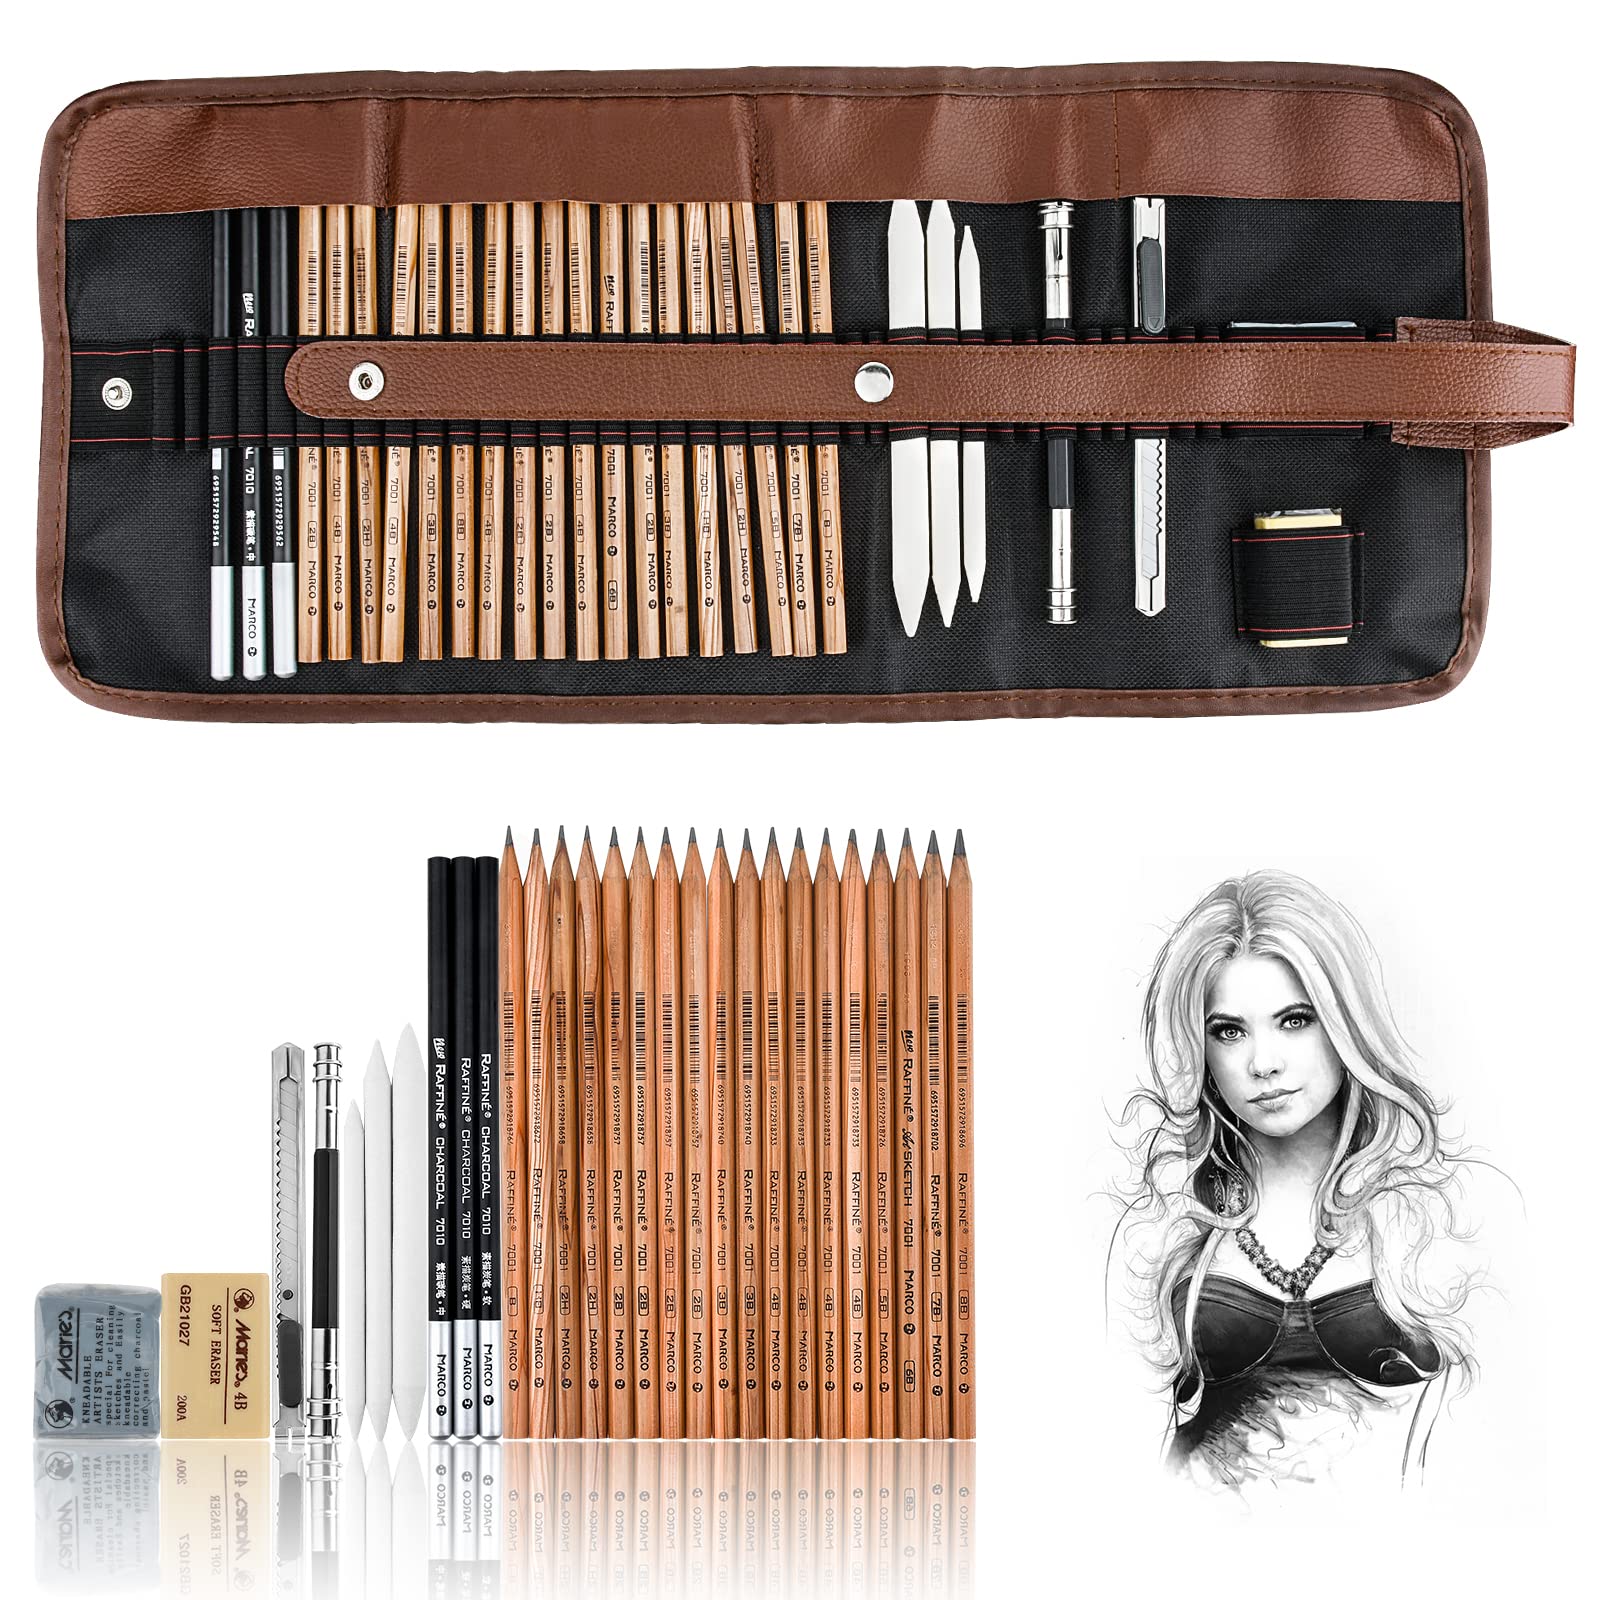 Buy SYGAProfessional Sketch and Drawing Pencils ，Art Pencil Box